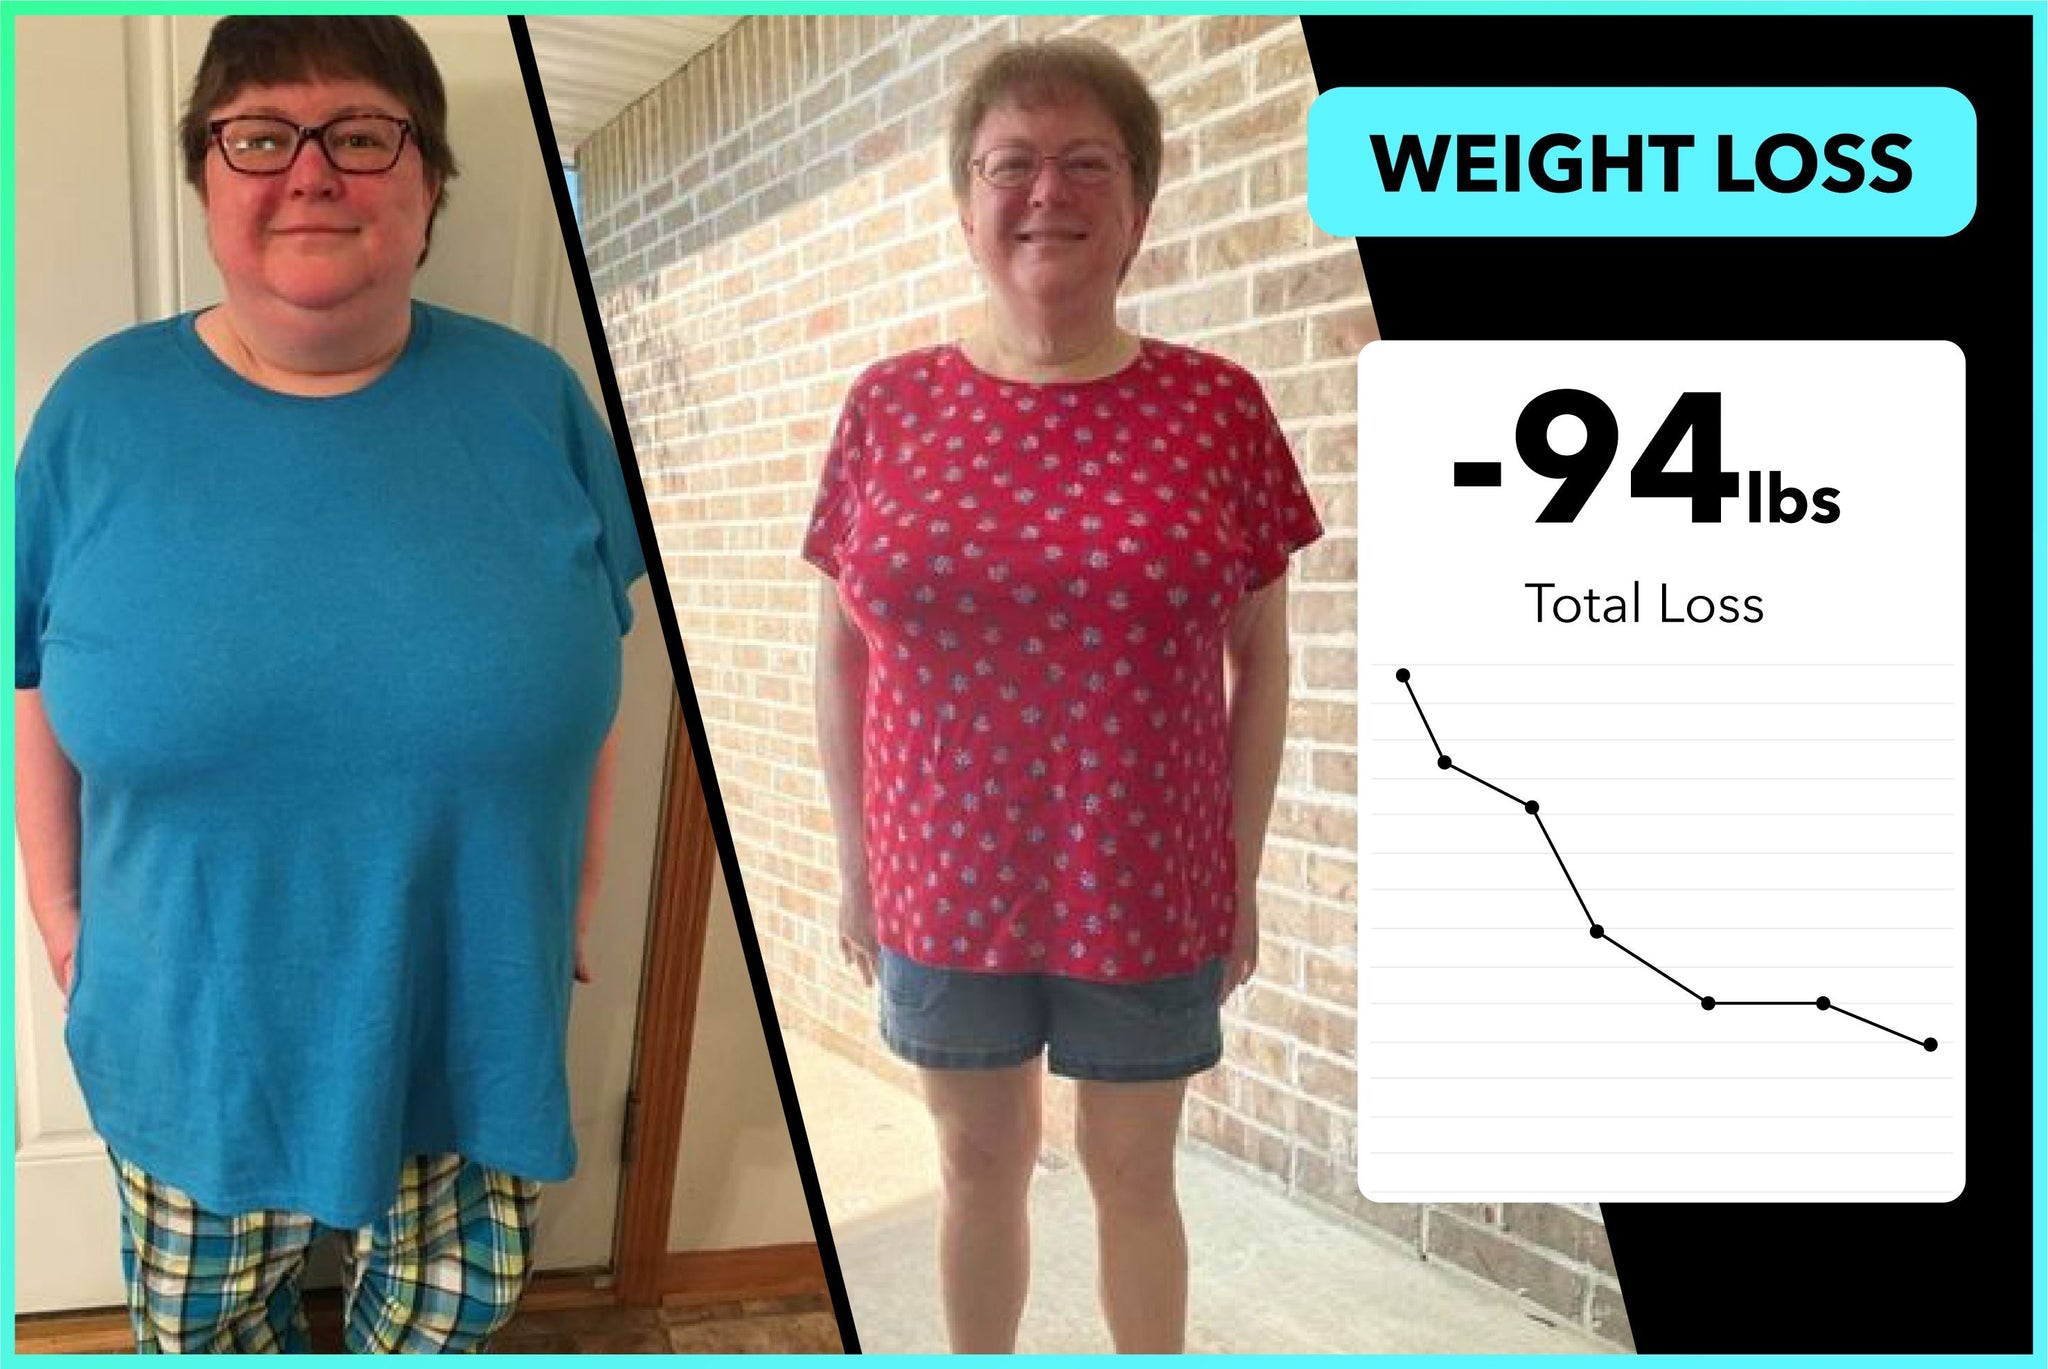 Anne lost 94lbs with Team RH